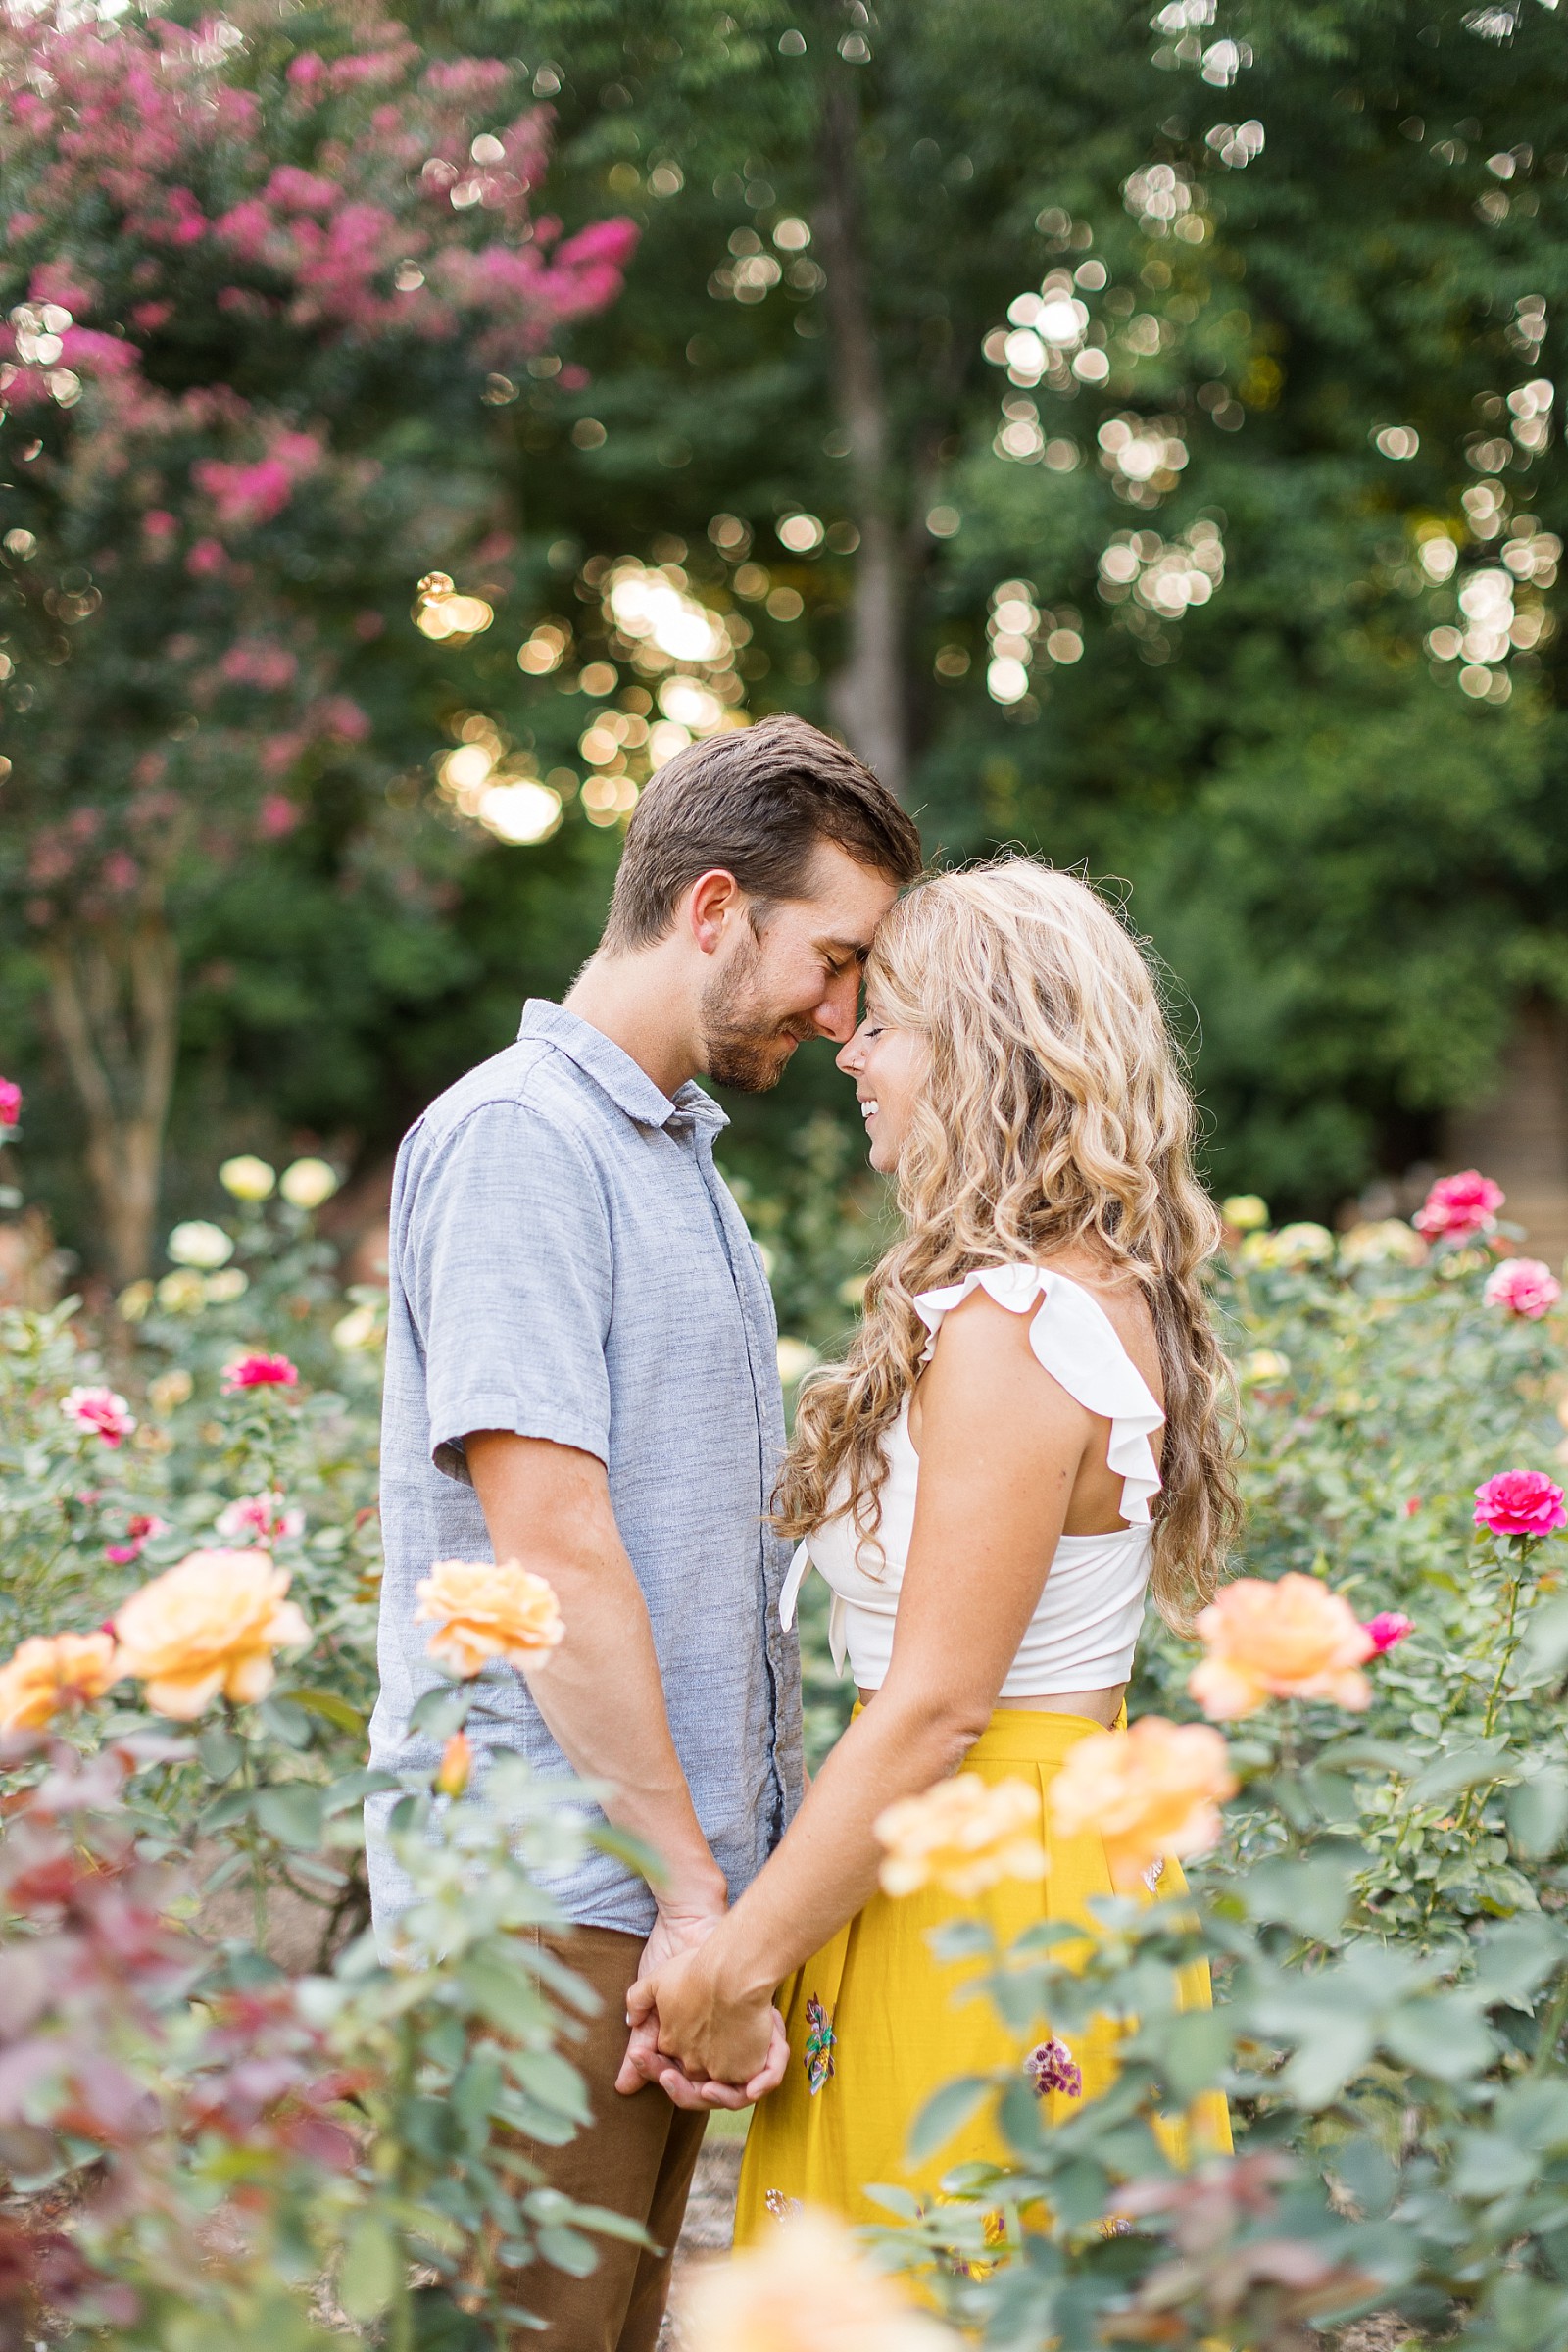 Photo session surrounded by roses | Raleigh Rose Garden Anniversary Photos | Raleigh Portrait Photographer | Raleigh NC Wedding Photographer